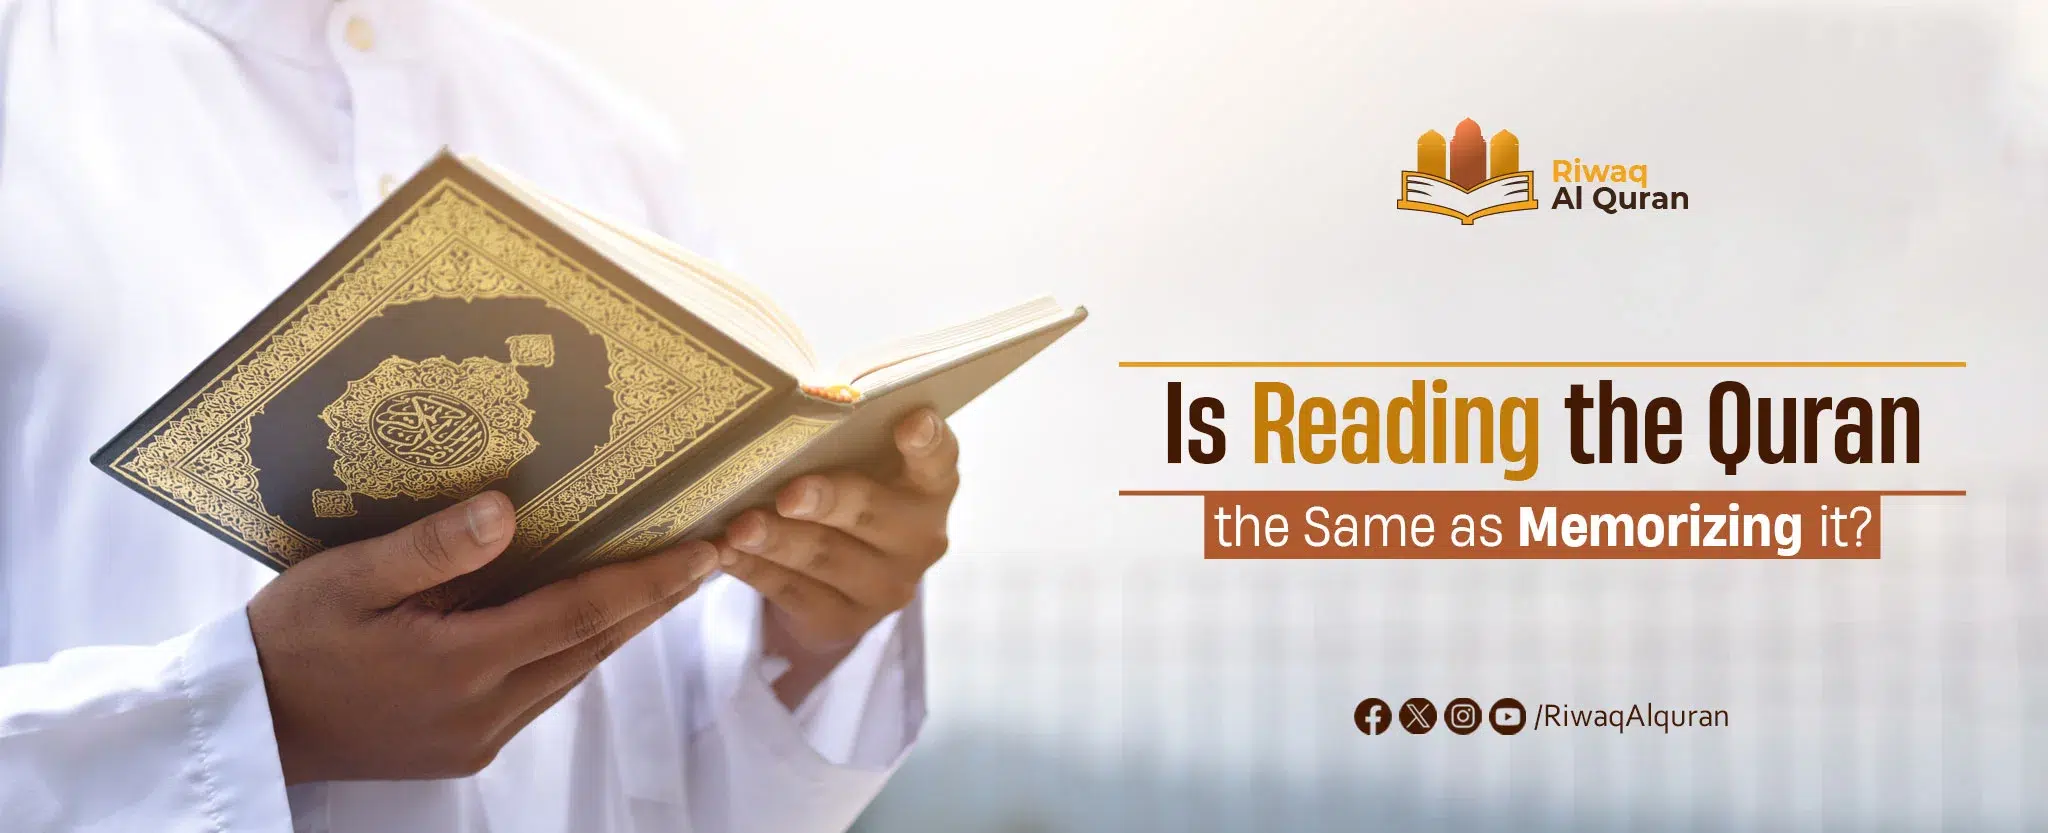 Is Reading the Quran the Same as Memorizing it? Memorize Or Read?!